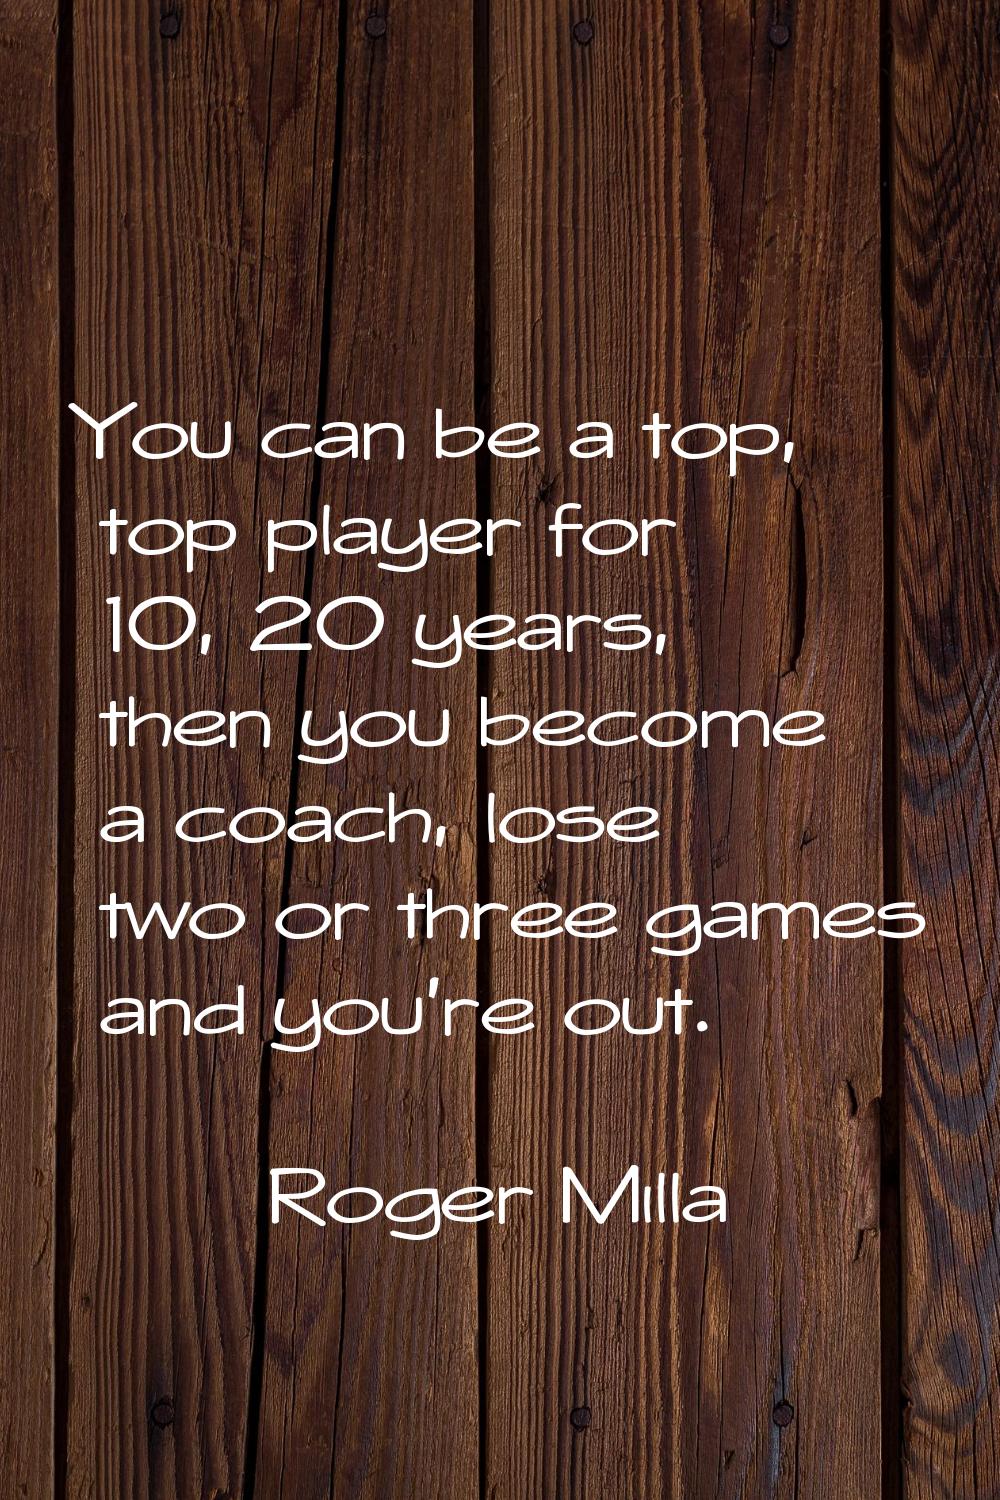 You can be a top, top player for 10, 20 years, then you become a coach, lose two or three games and